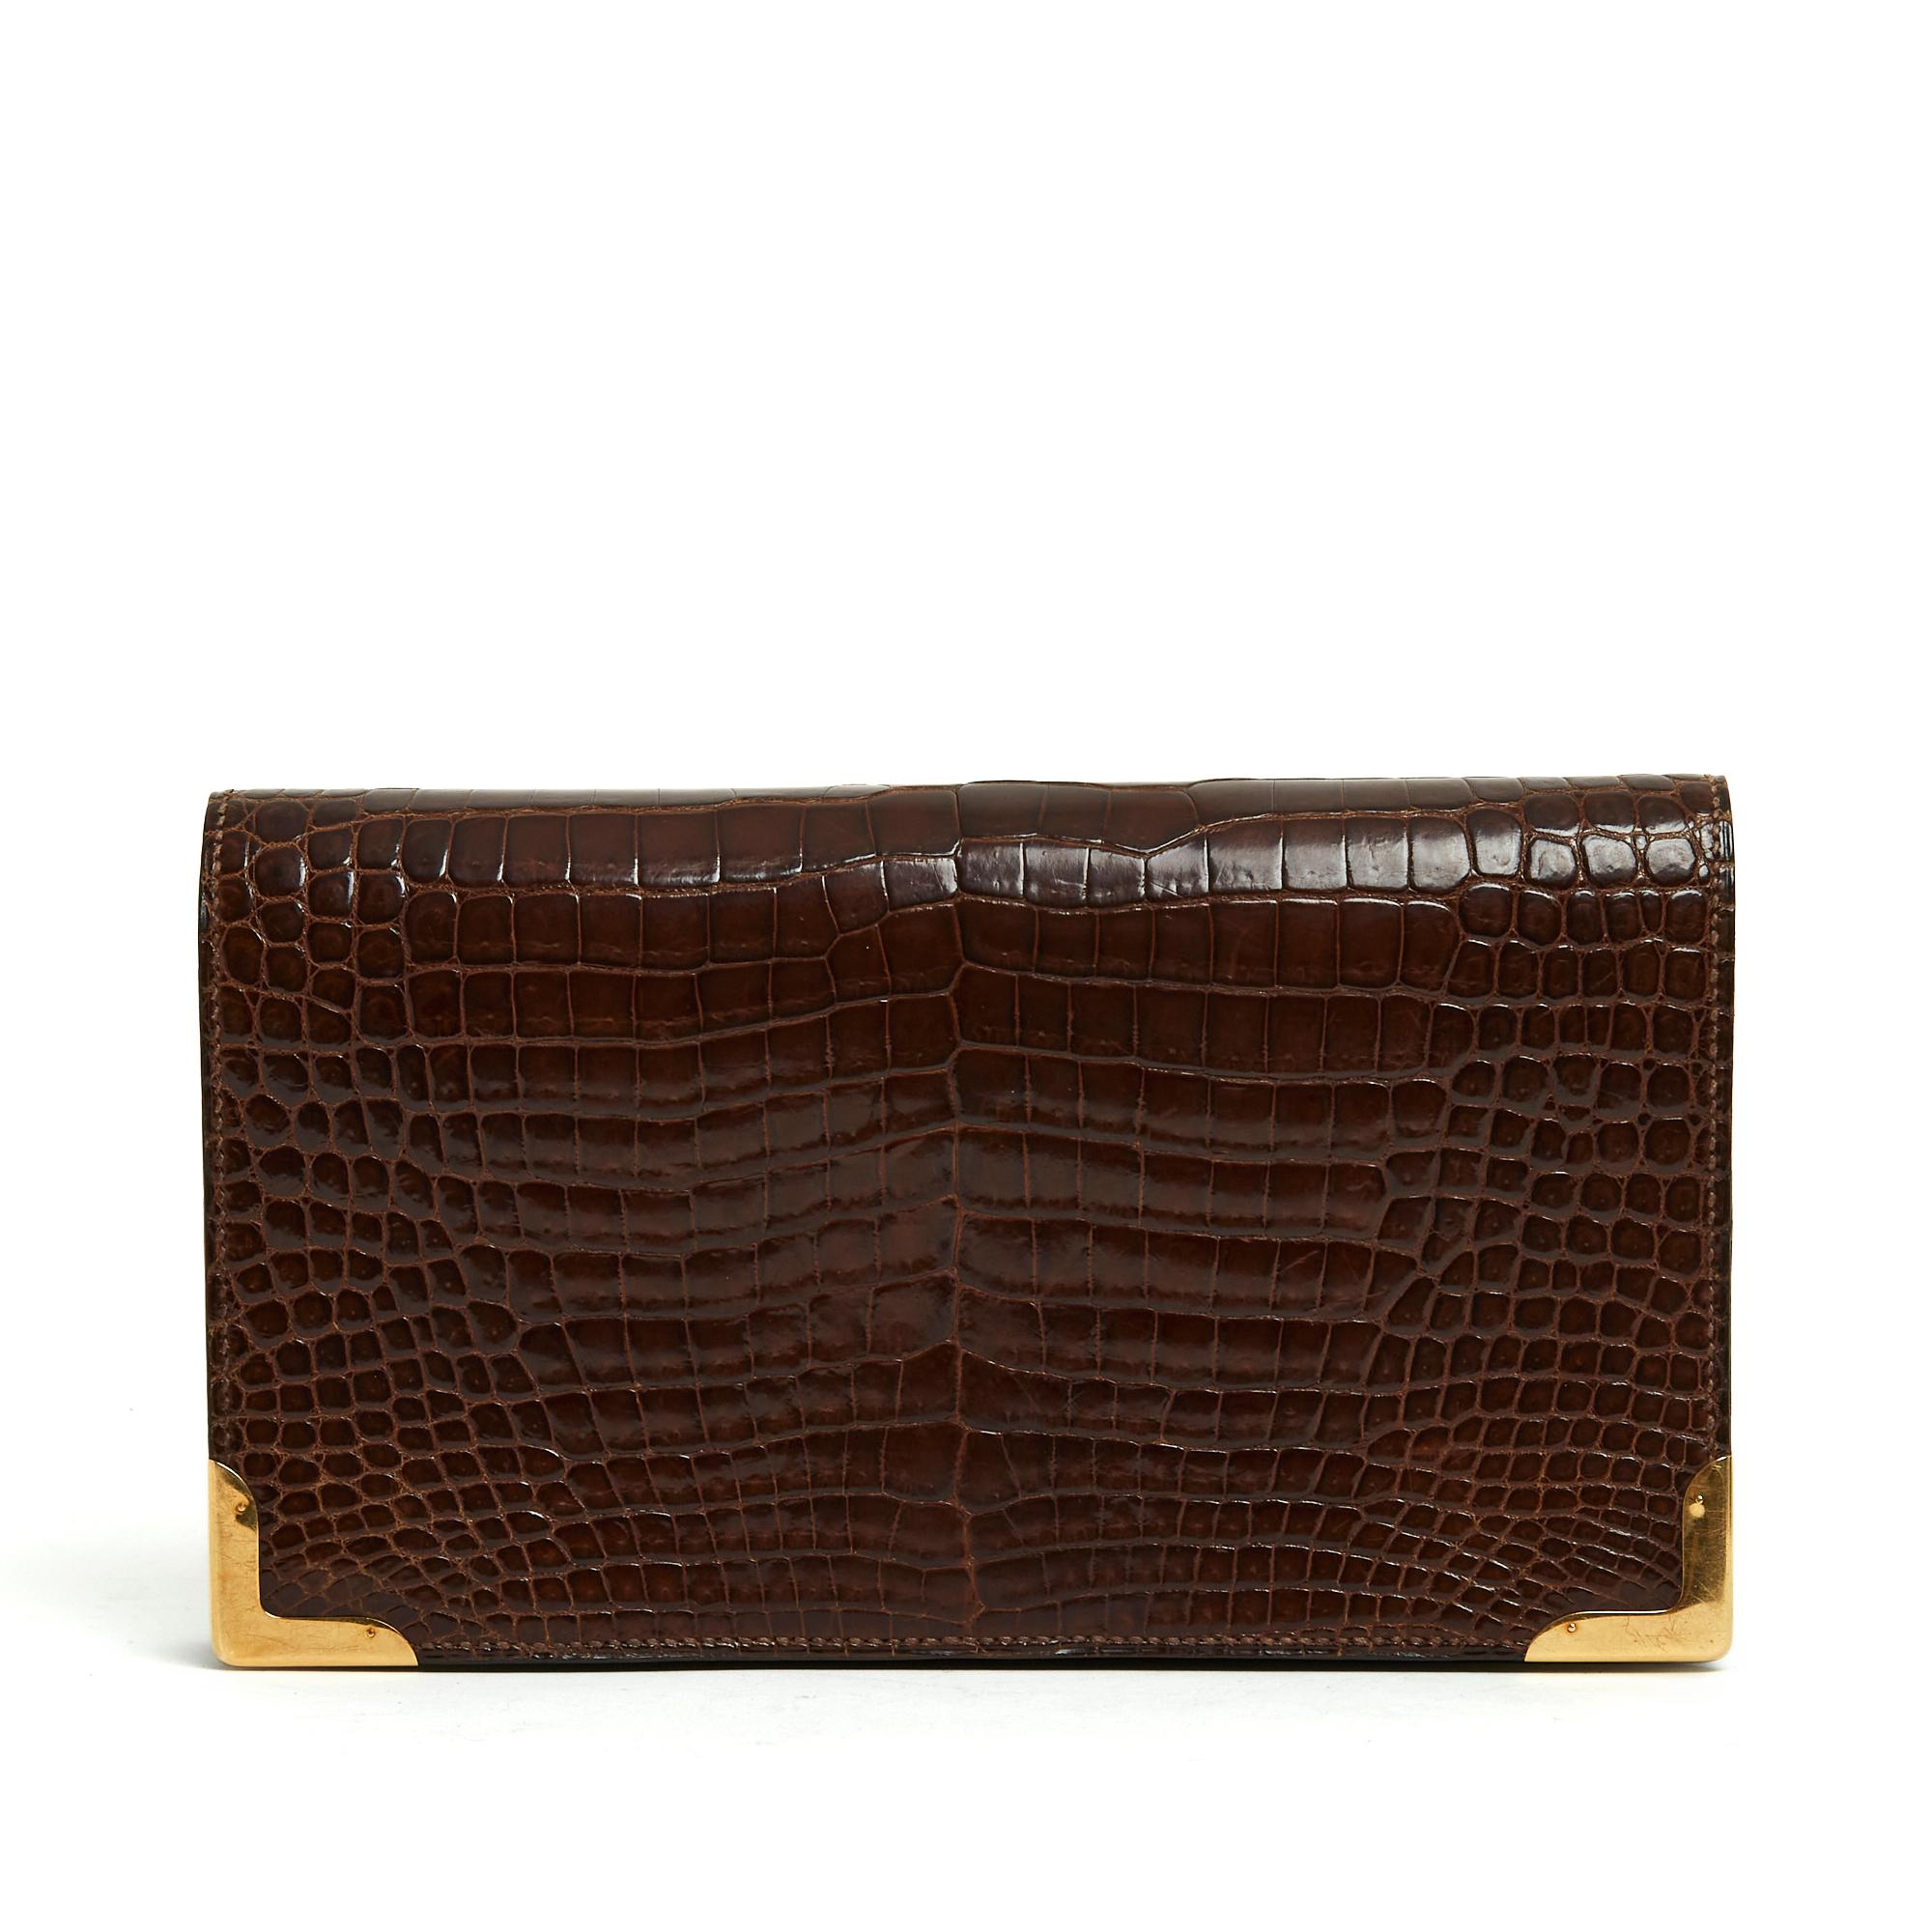 Hermès Coins d'Or clutch bag in precious leather and gold metal, interior in soft leather with 1 compartment and 1 front pocket marked with the Hermès carriage in silver (indicating that it is a special order), thin removable shoulder strap in